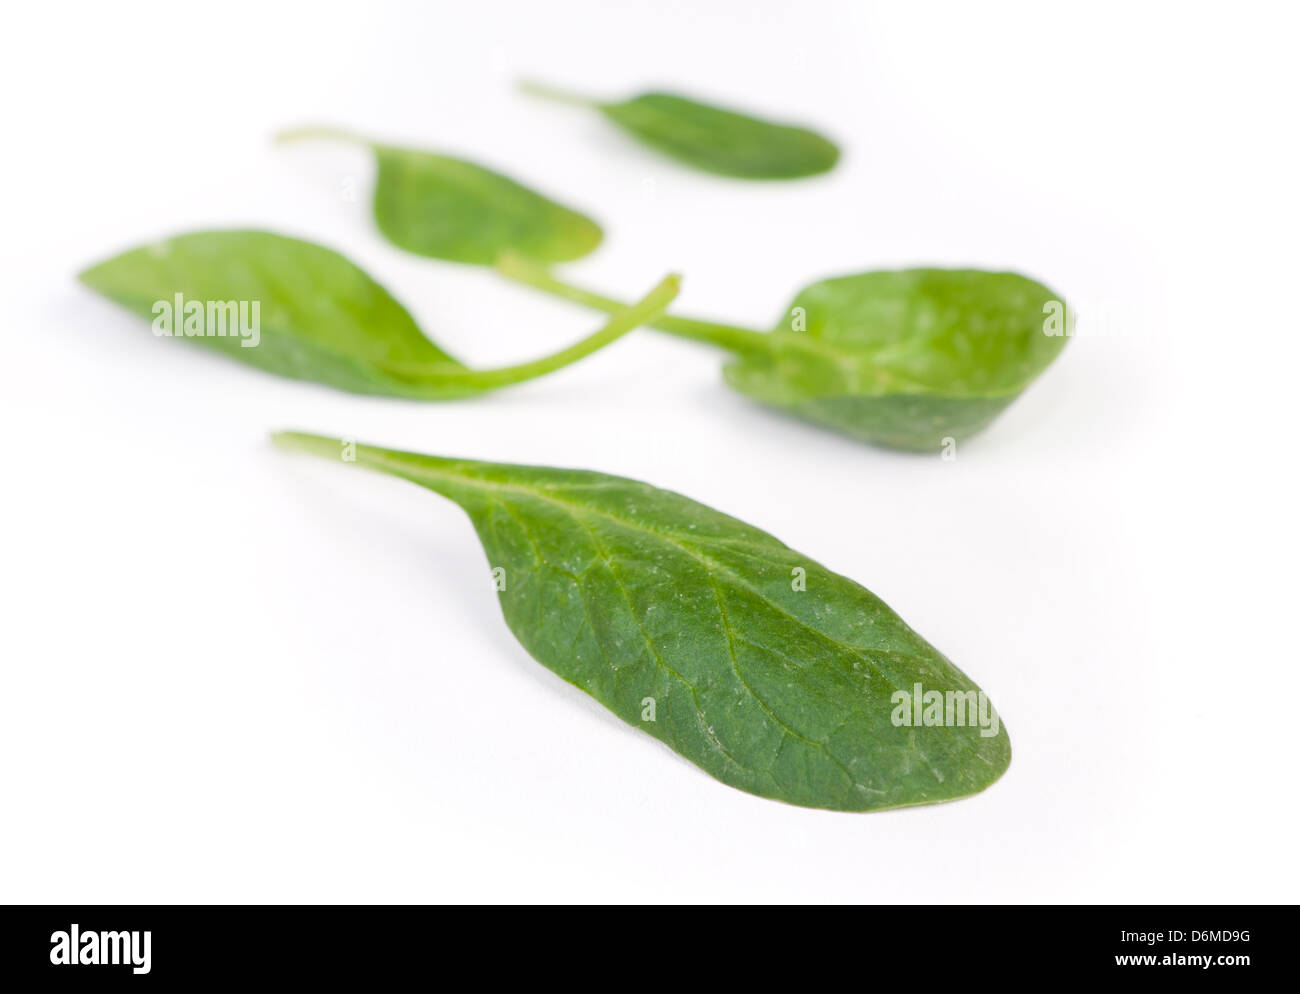 Organic fresh spinach leaves composition Stock Photo